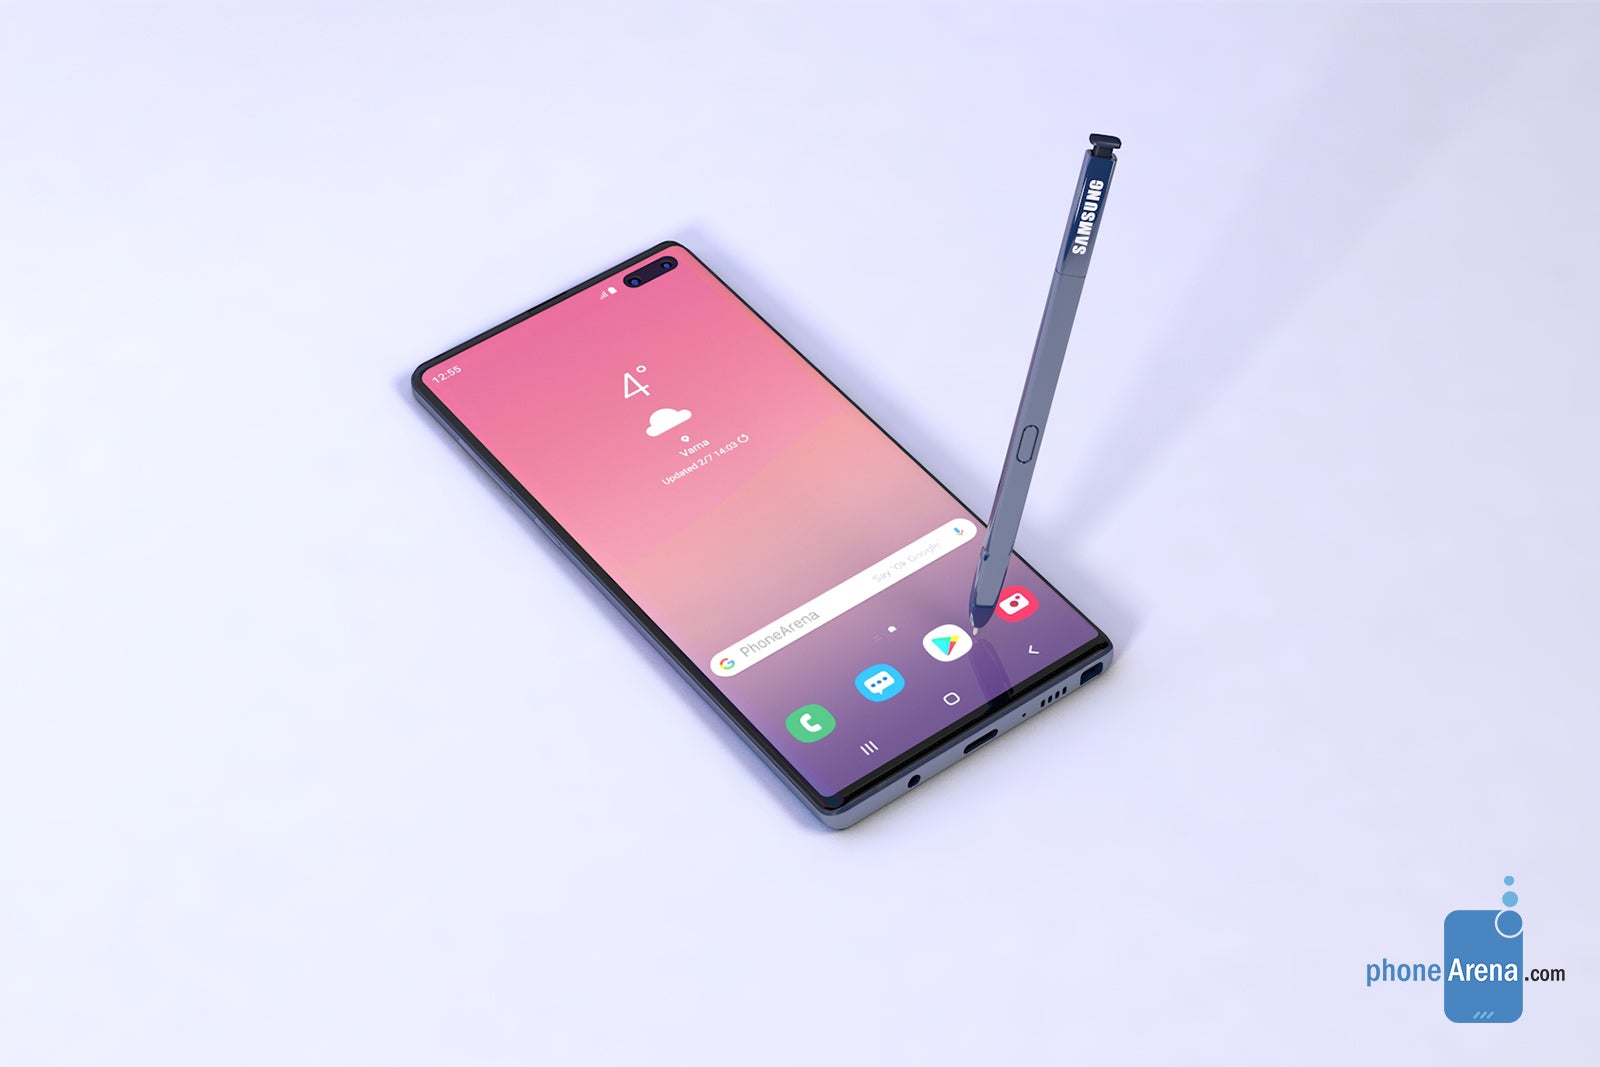 Galaxy Note 10 Pro tipped to be a new member of Samsung's Note line